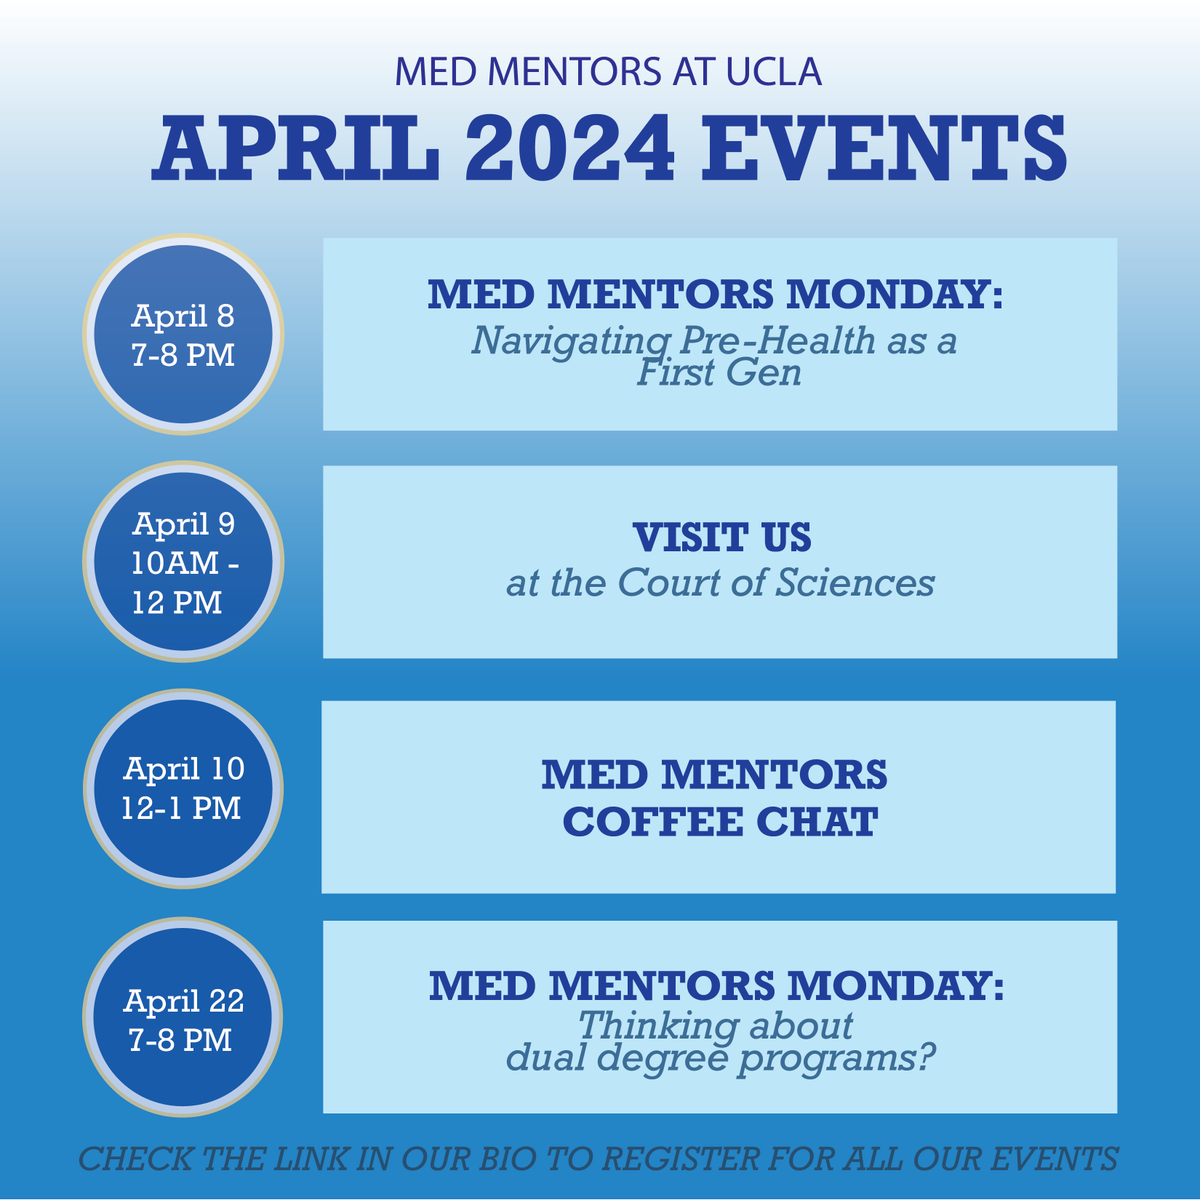 April is here! We have a lot of great events this month – mark your calendars! We hope to see you there! Med Mentor Mondays and Coffee Chat links can be found on our linktree.
#uclamedmentors #premed #amcas #medschoolapps